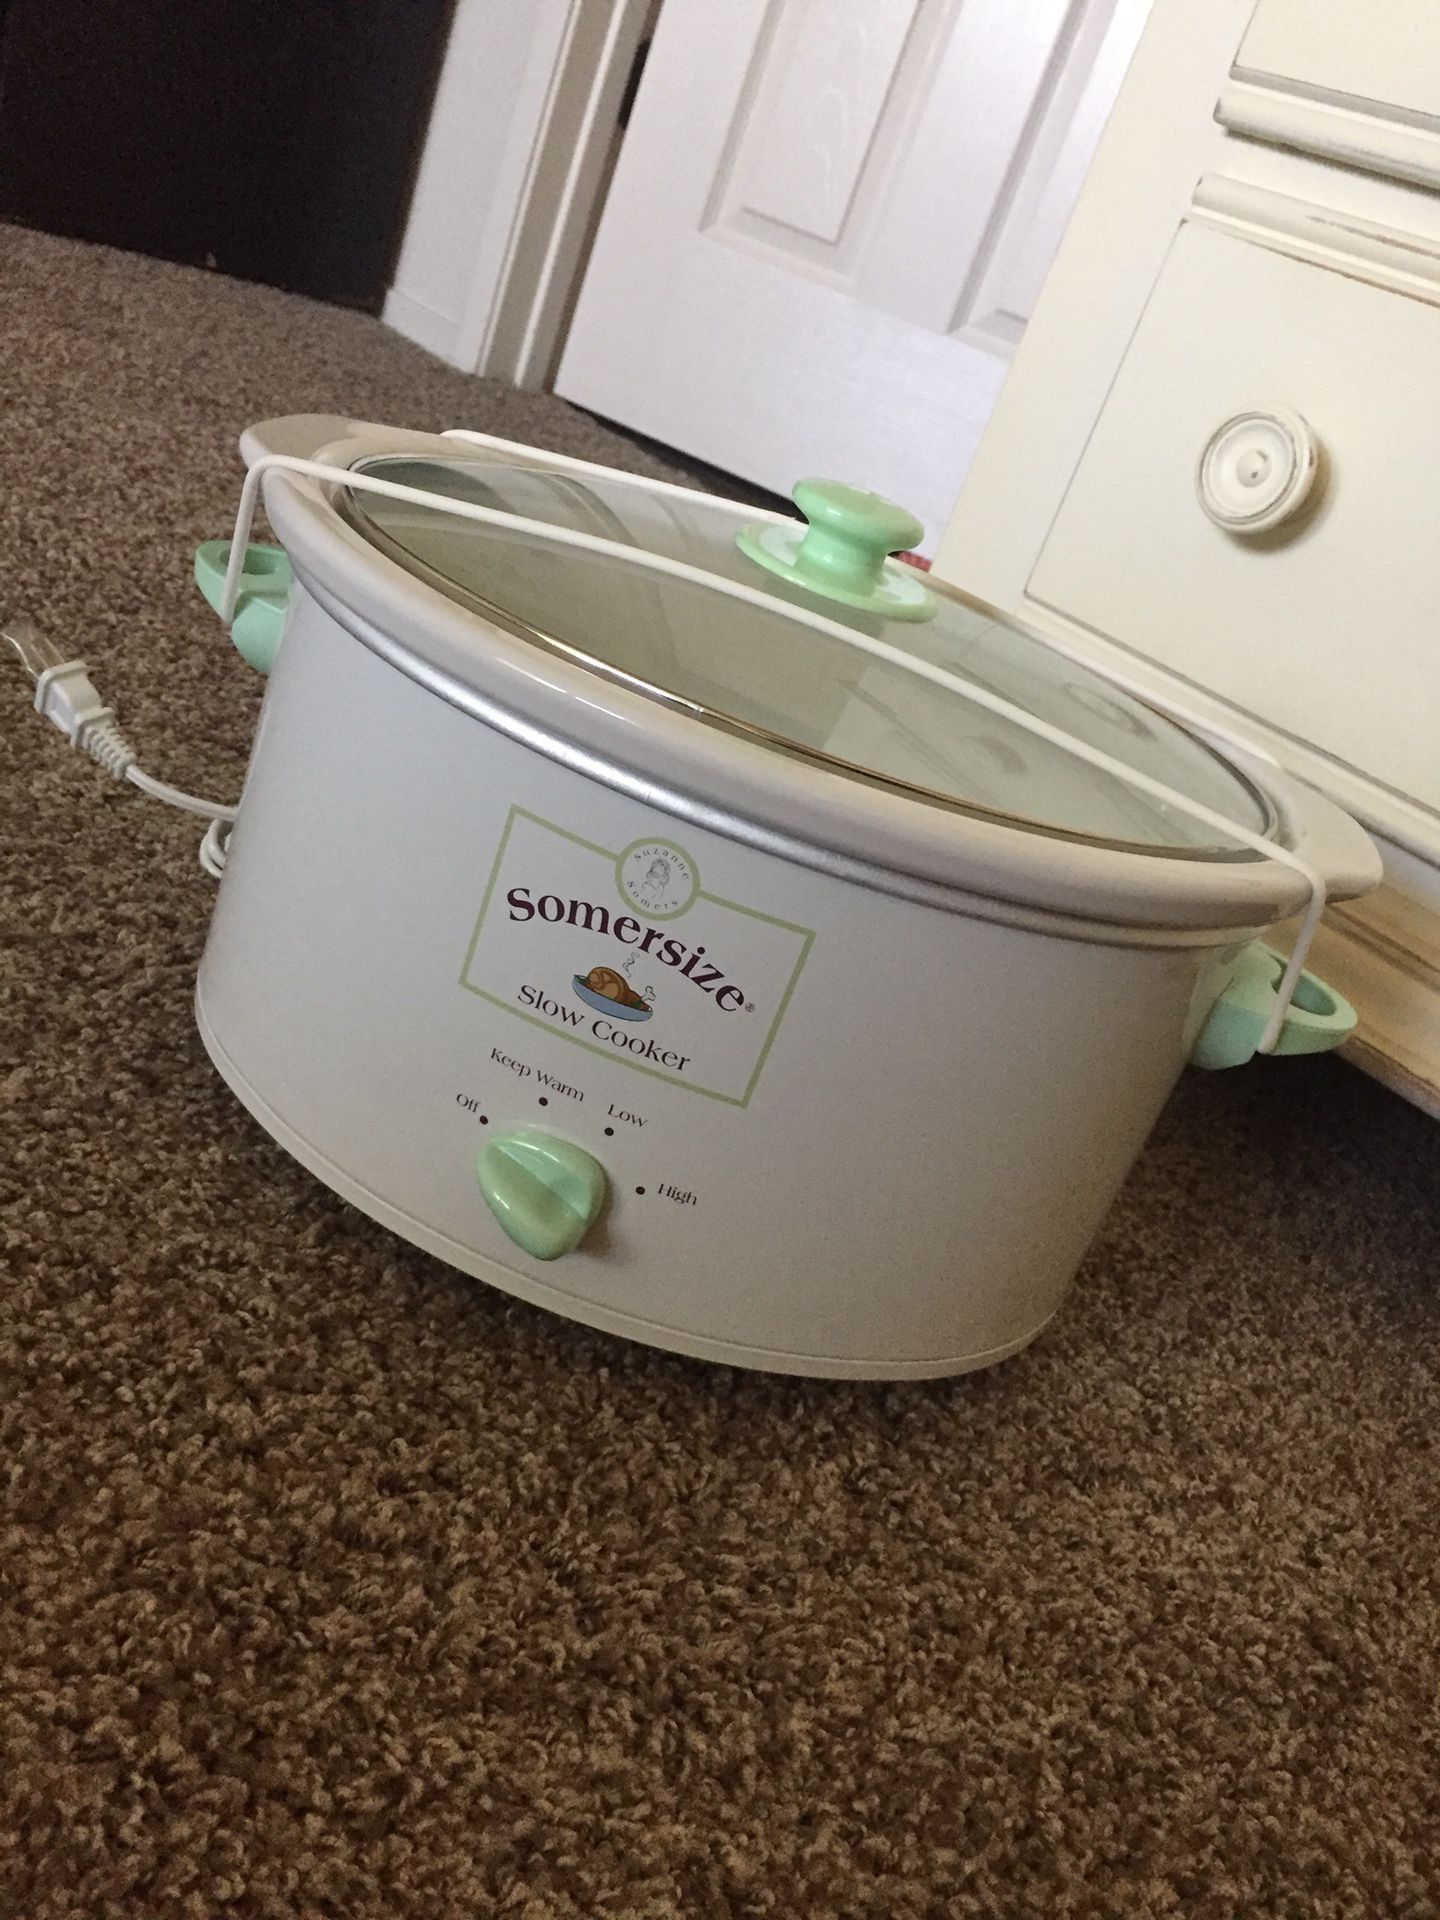 Parini Dual compartment Slow Cooker and Warmer for Sale in Fountain Valley,  CA - OfferUp